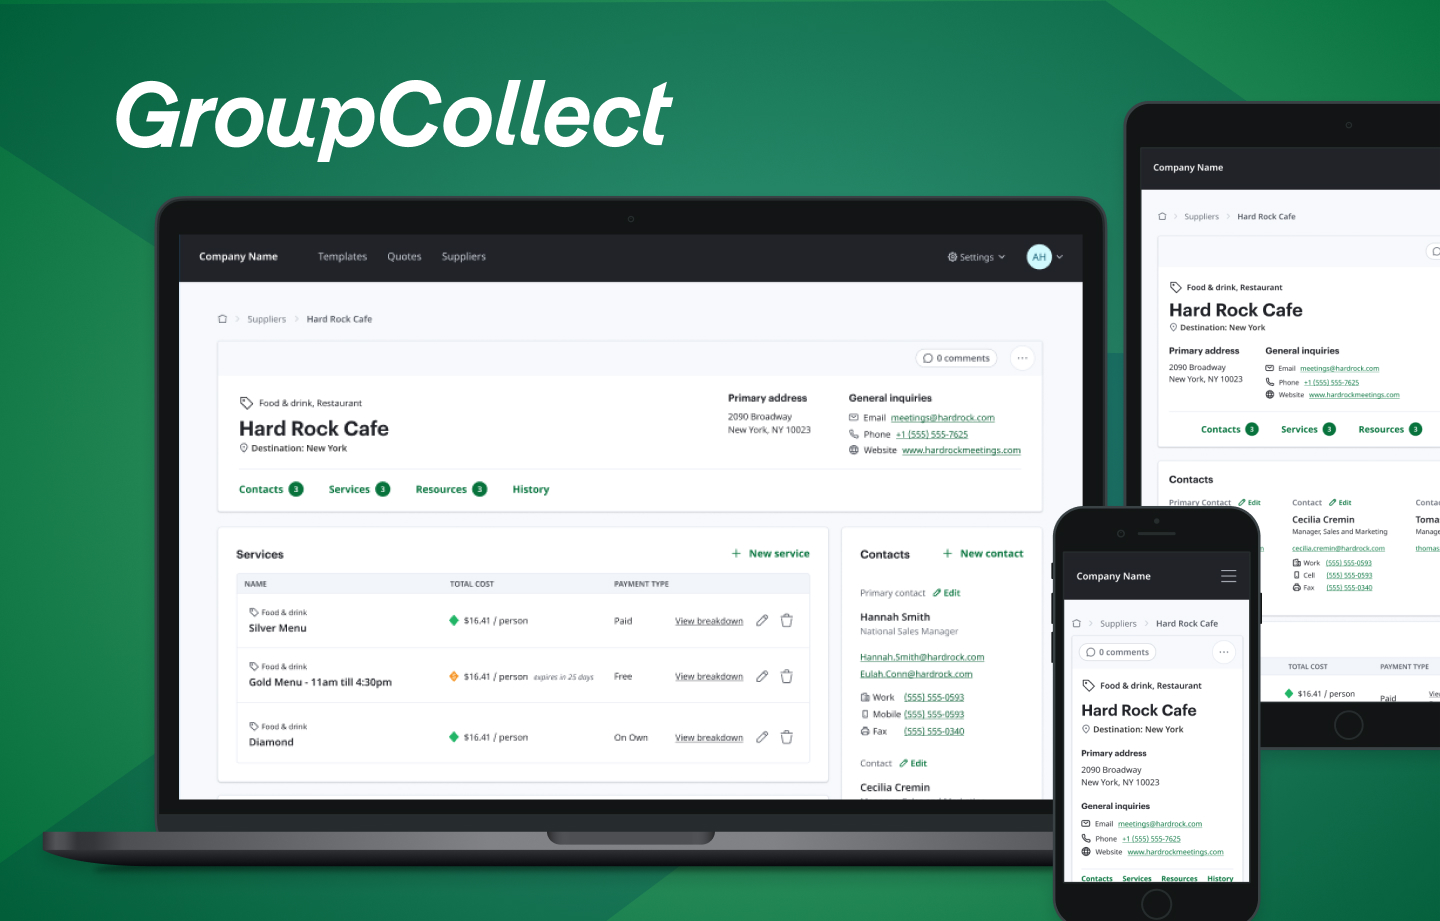 GroupCollect Quotes' supplier page design